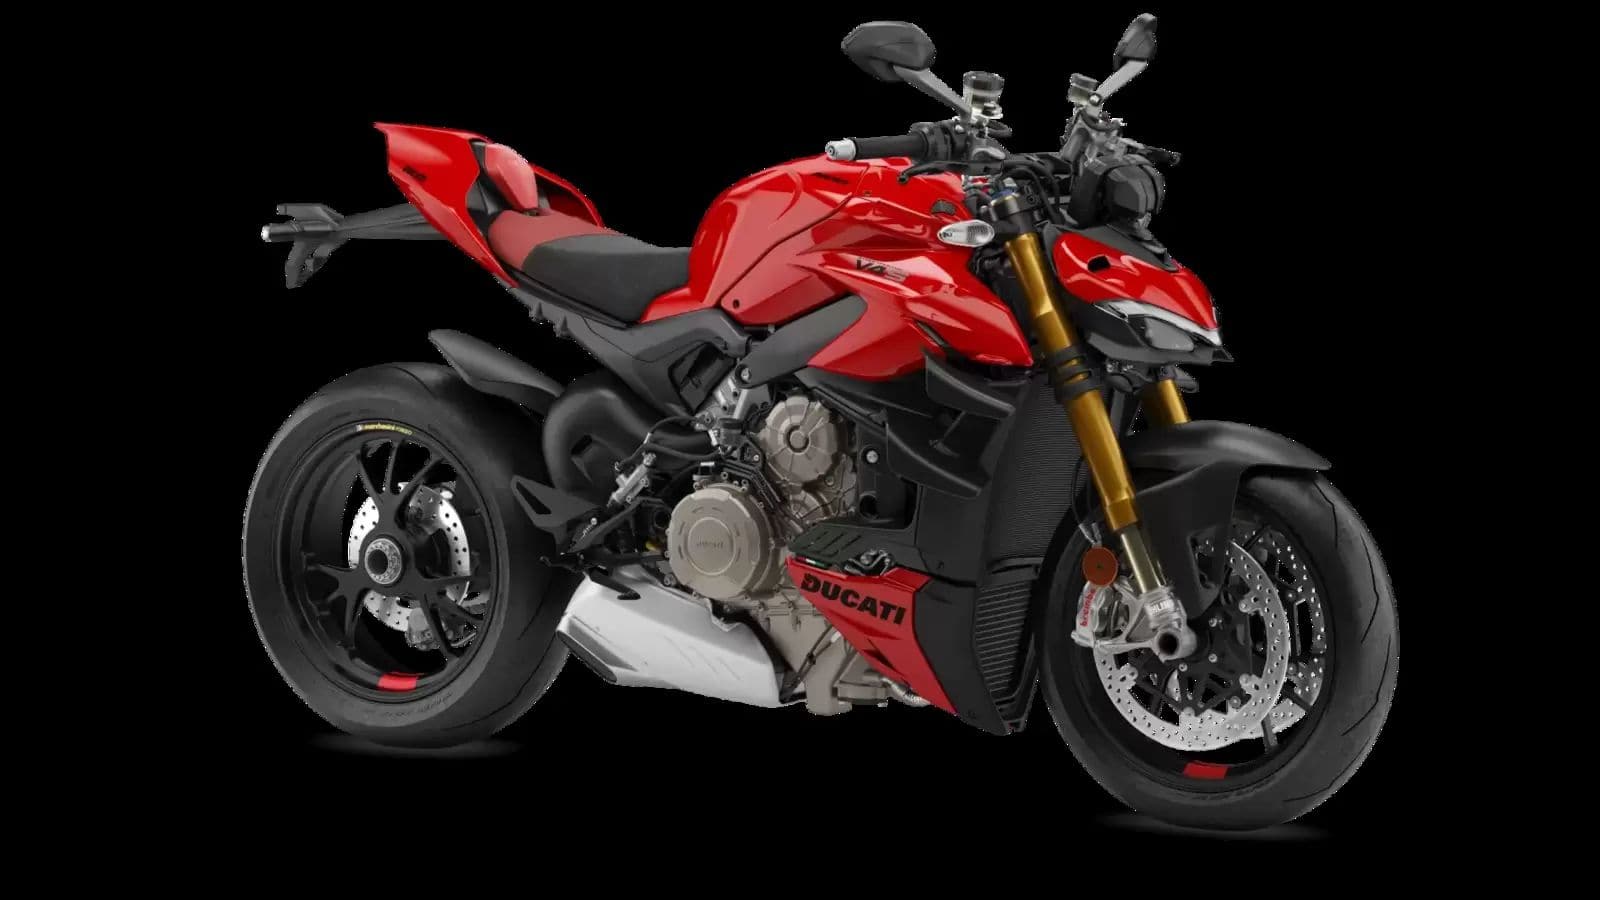 Ducati announces exciting exchange program in India: Check offers